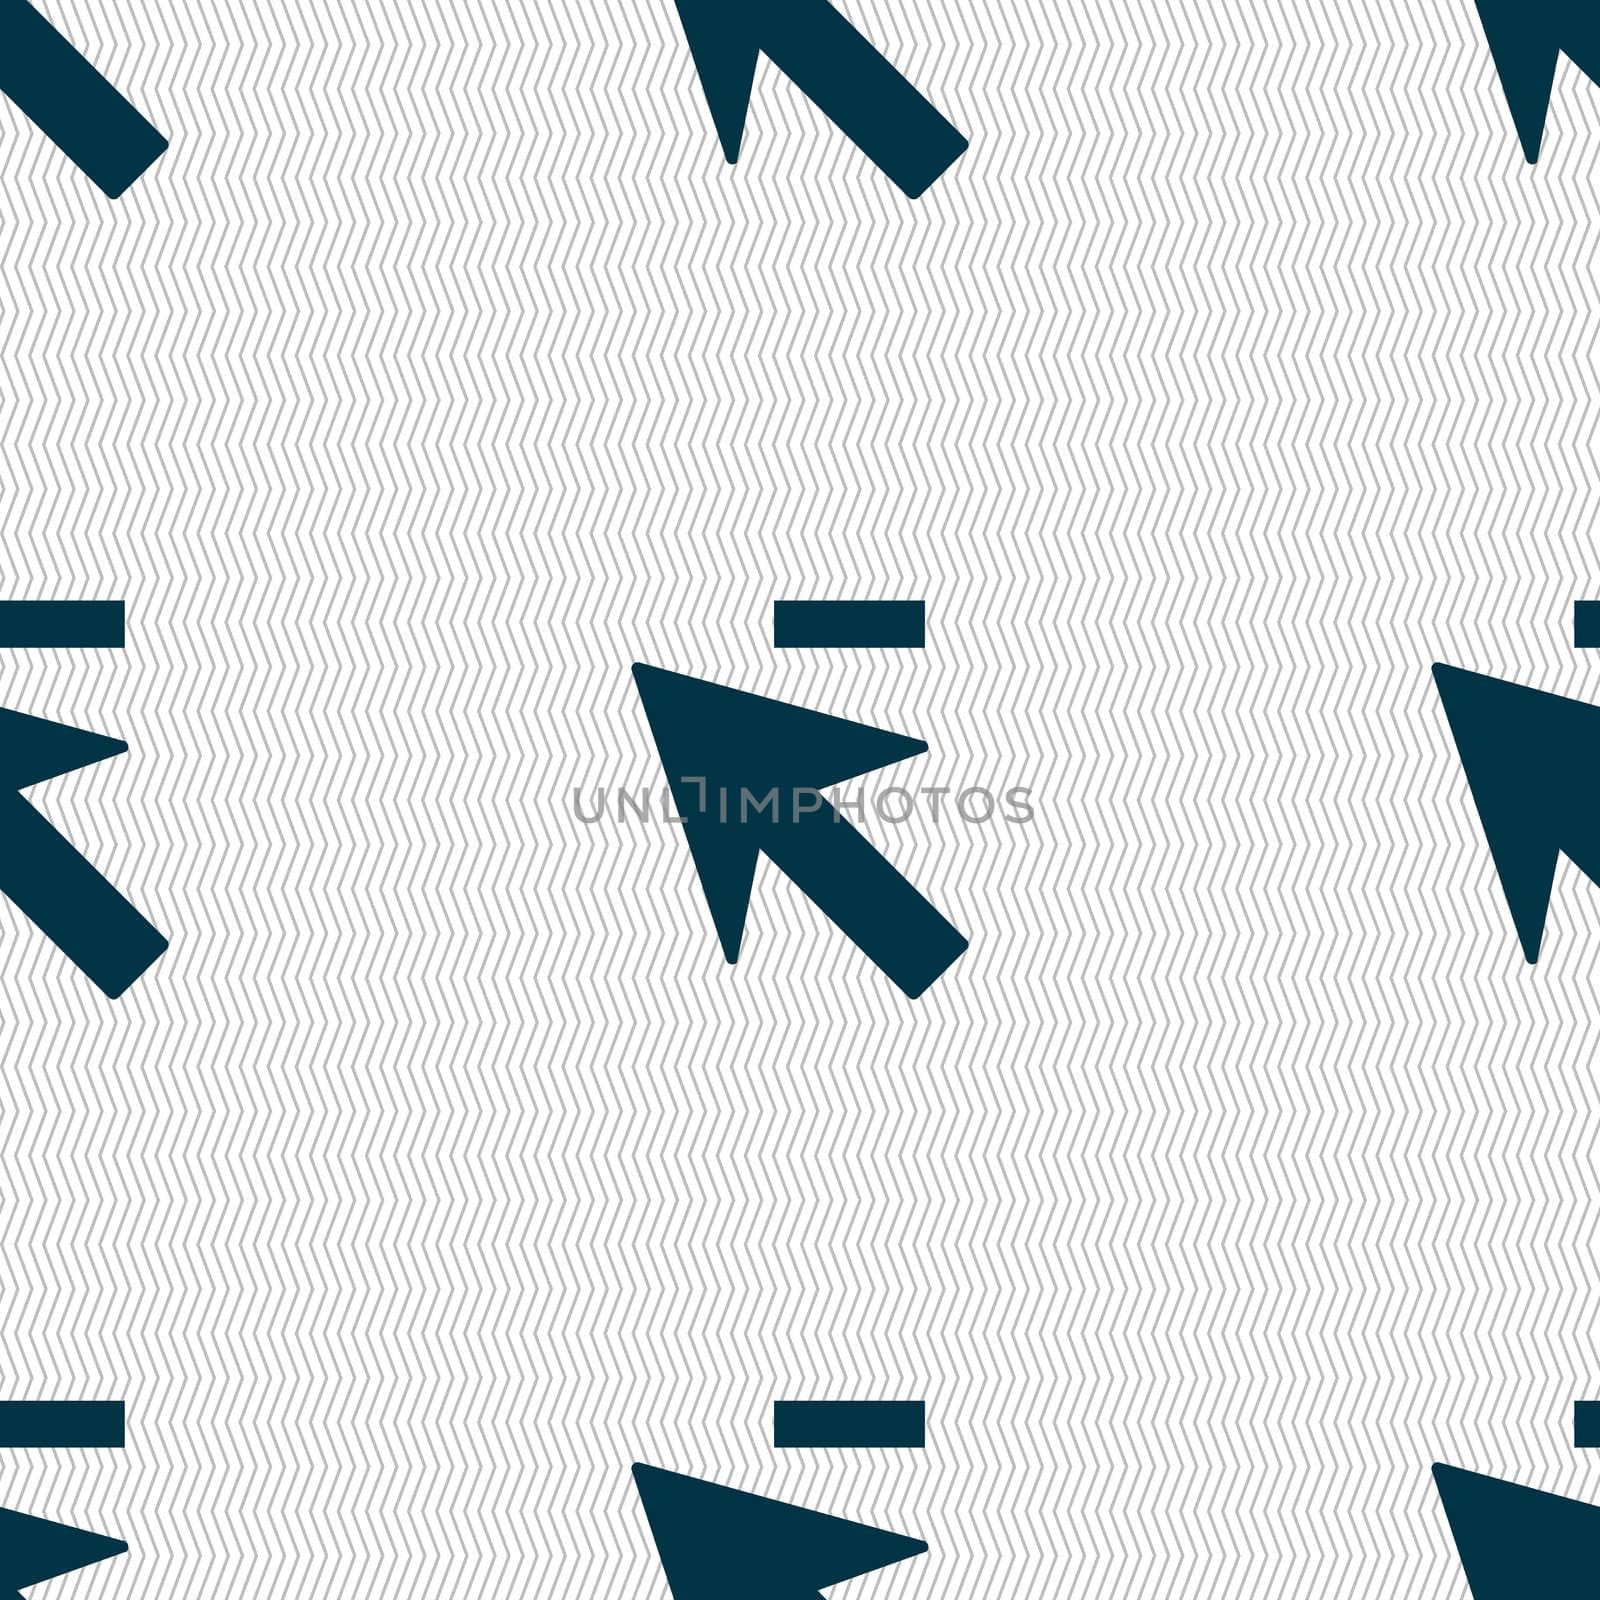 Cursor, arrow minus icon sign. Seamless abstract background with geometric shapes.  by serhii_lohvyniuk